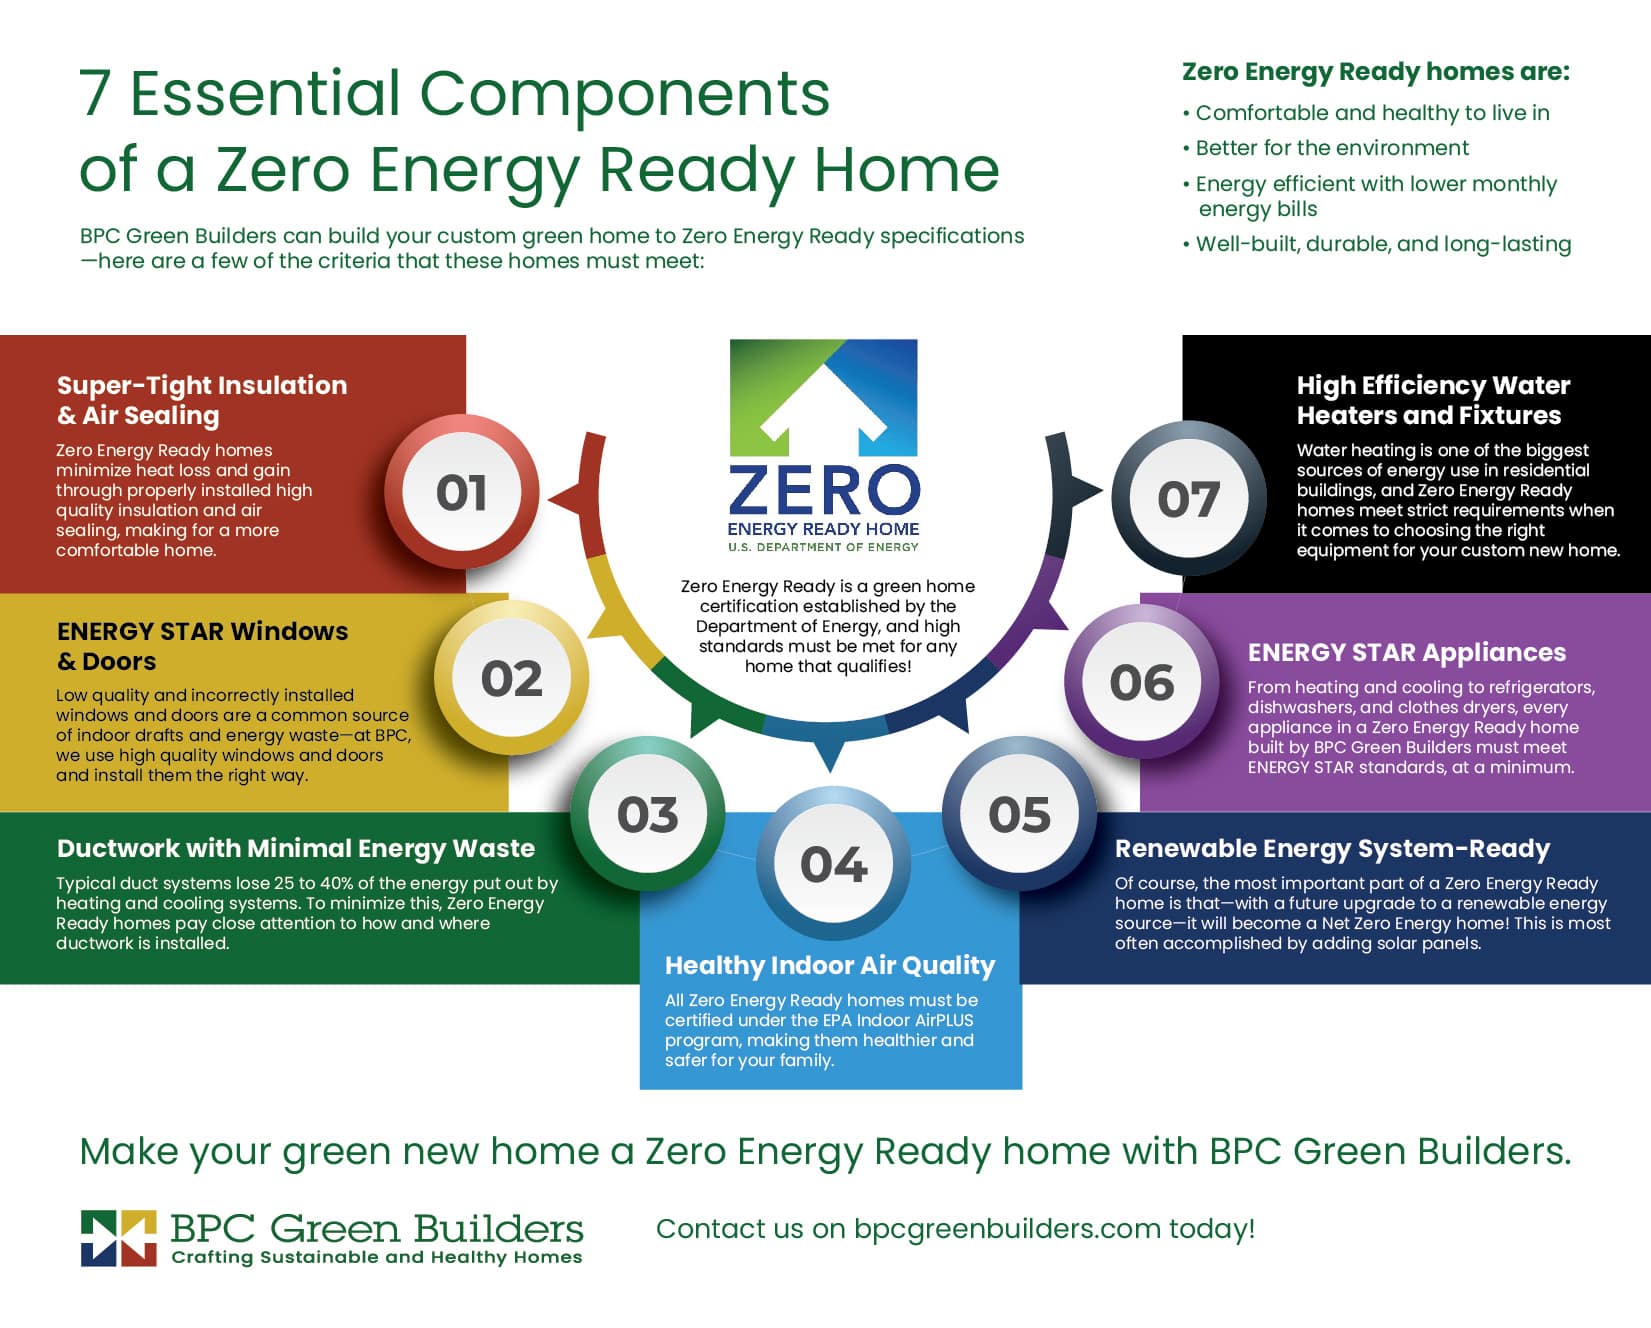 7 Essential Components of a Zero Energy Ready Home infographic